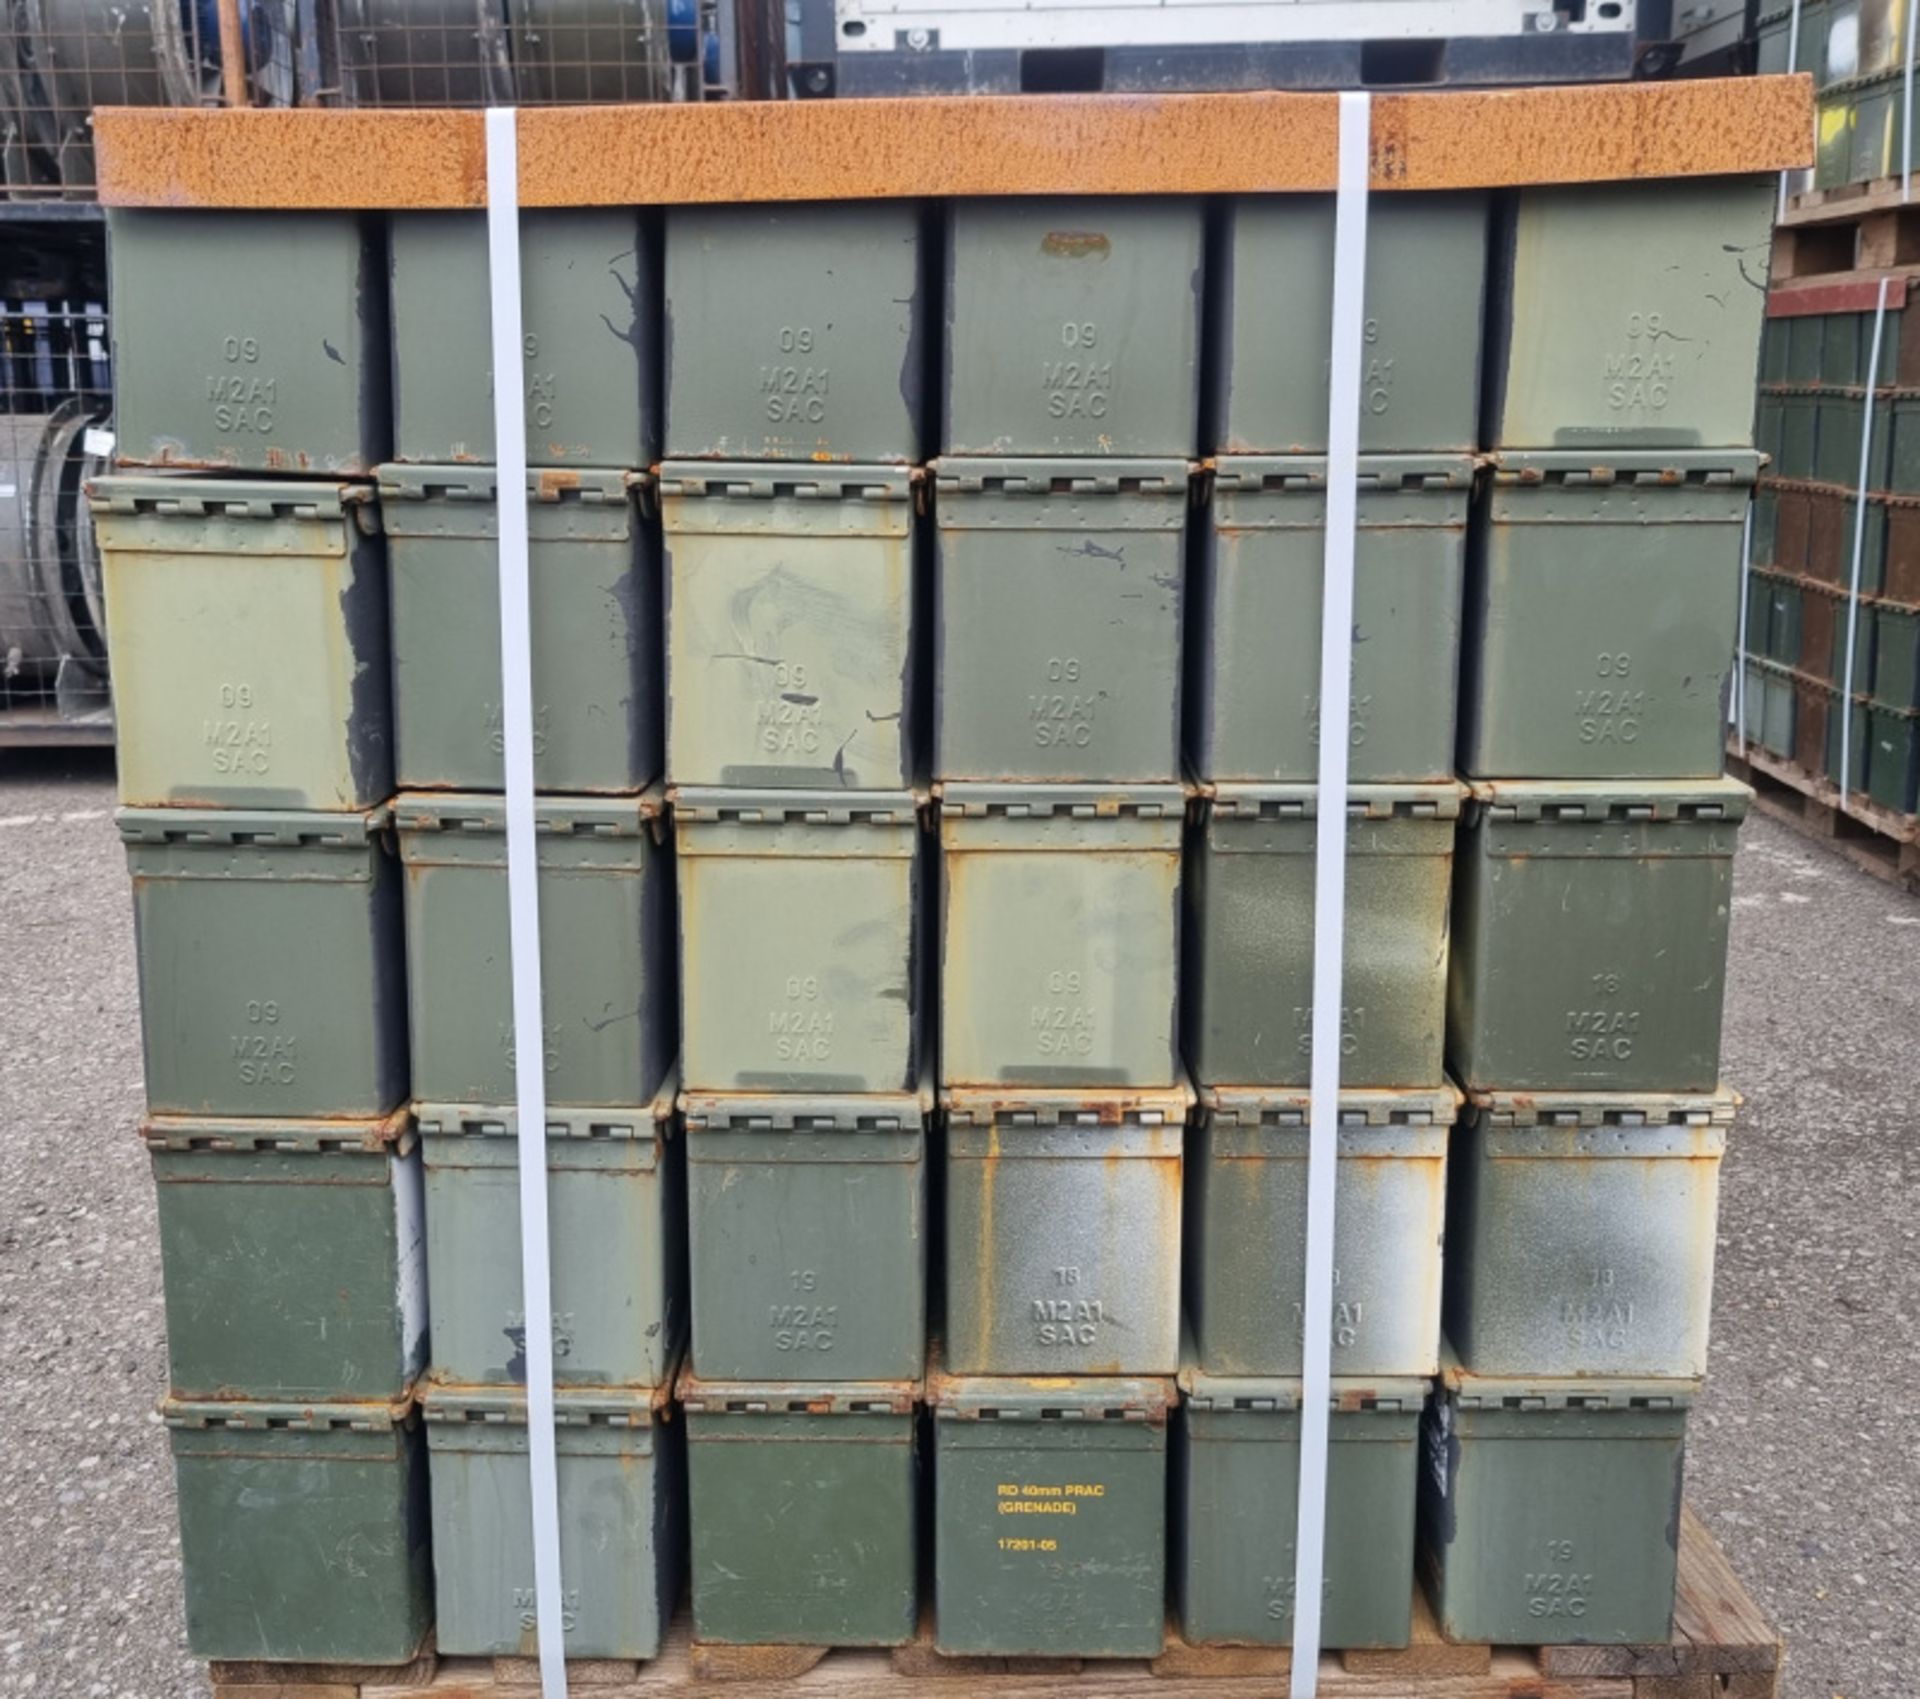 1x Pallet of M2A1 ammo containers - total quantity 120 - Image 2 of 11